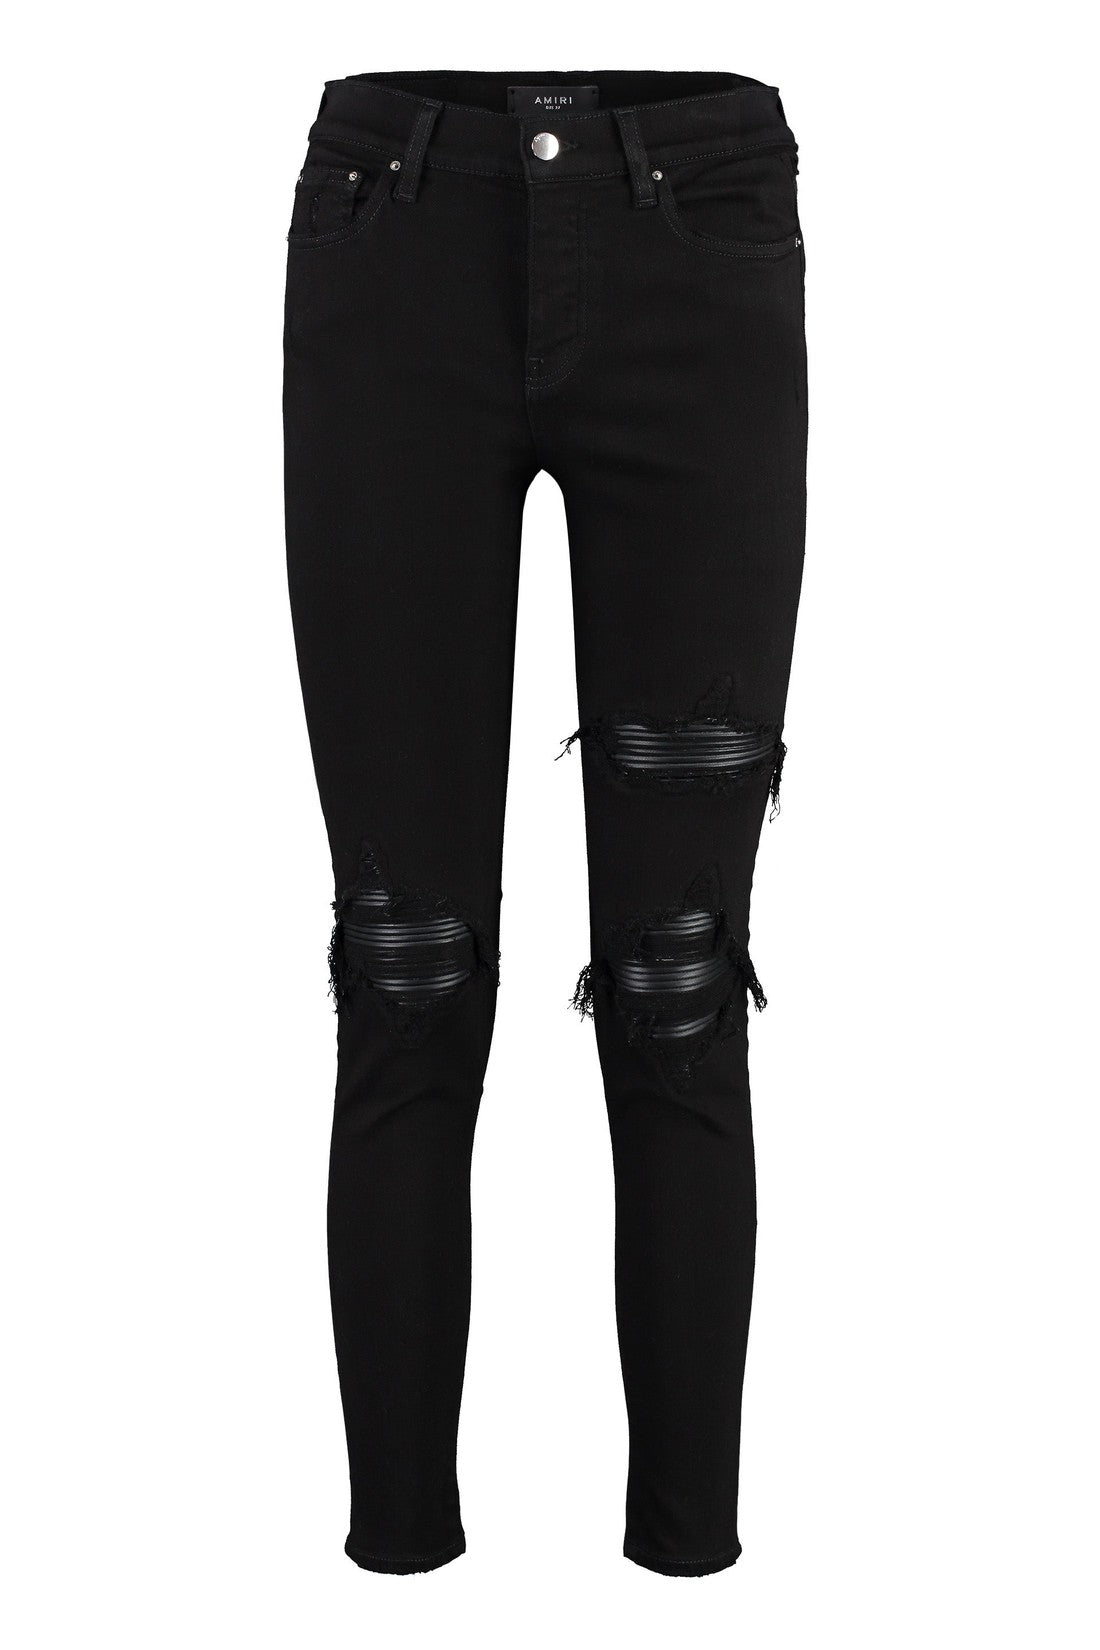 AMIRI-OUTLET-SALE-High-rise skinny-fit jeans-ARCHIVIST